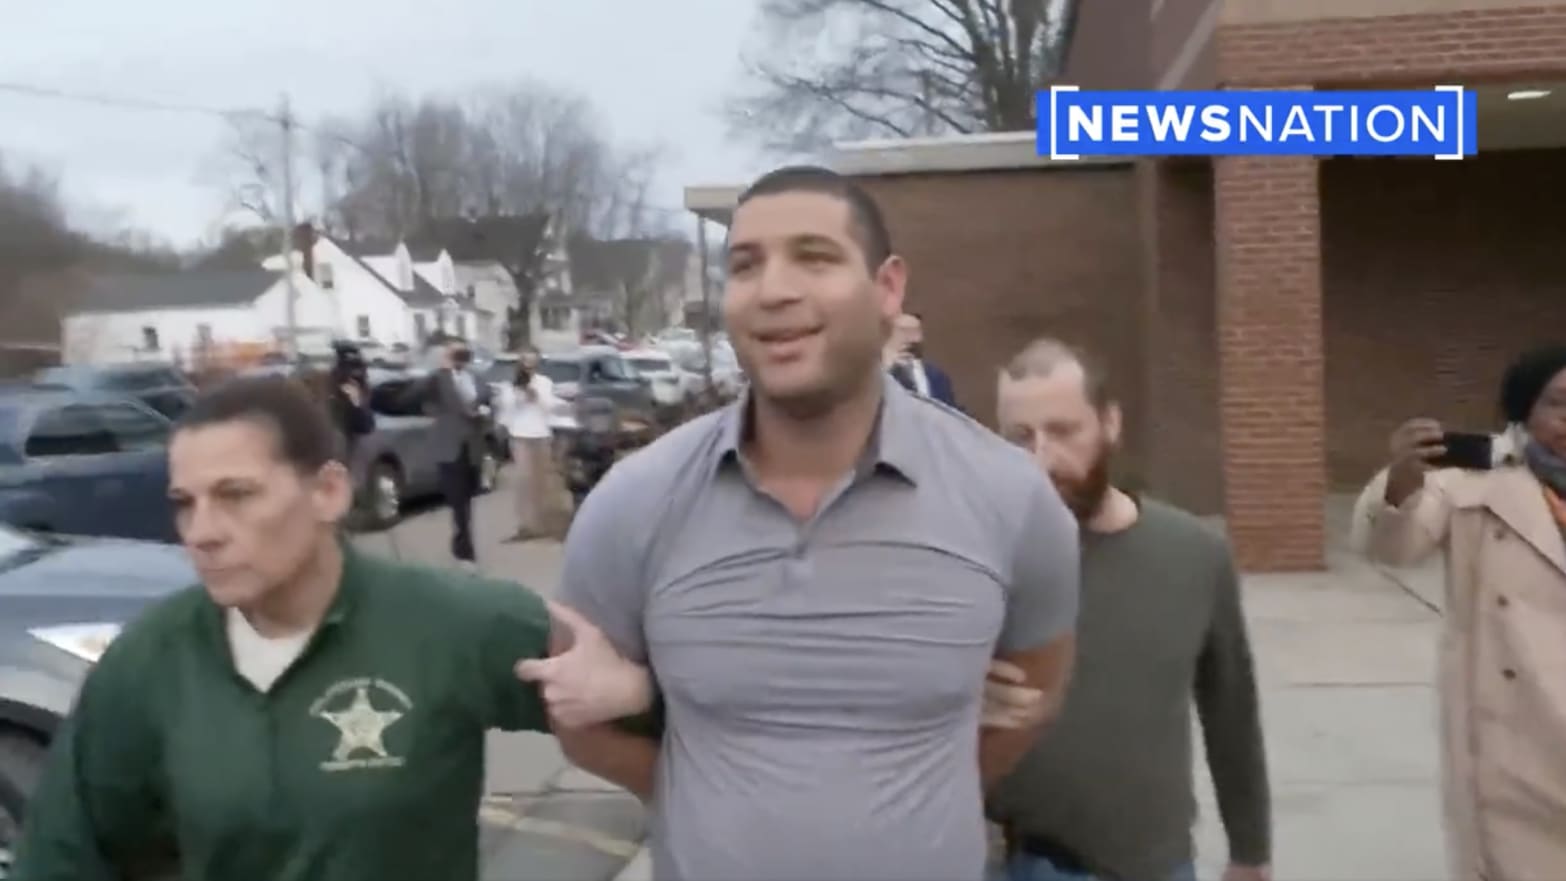 NewsNation’s Evan Lambert being arrested by police in Ohio